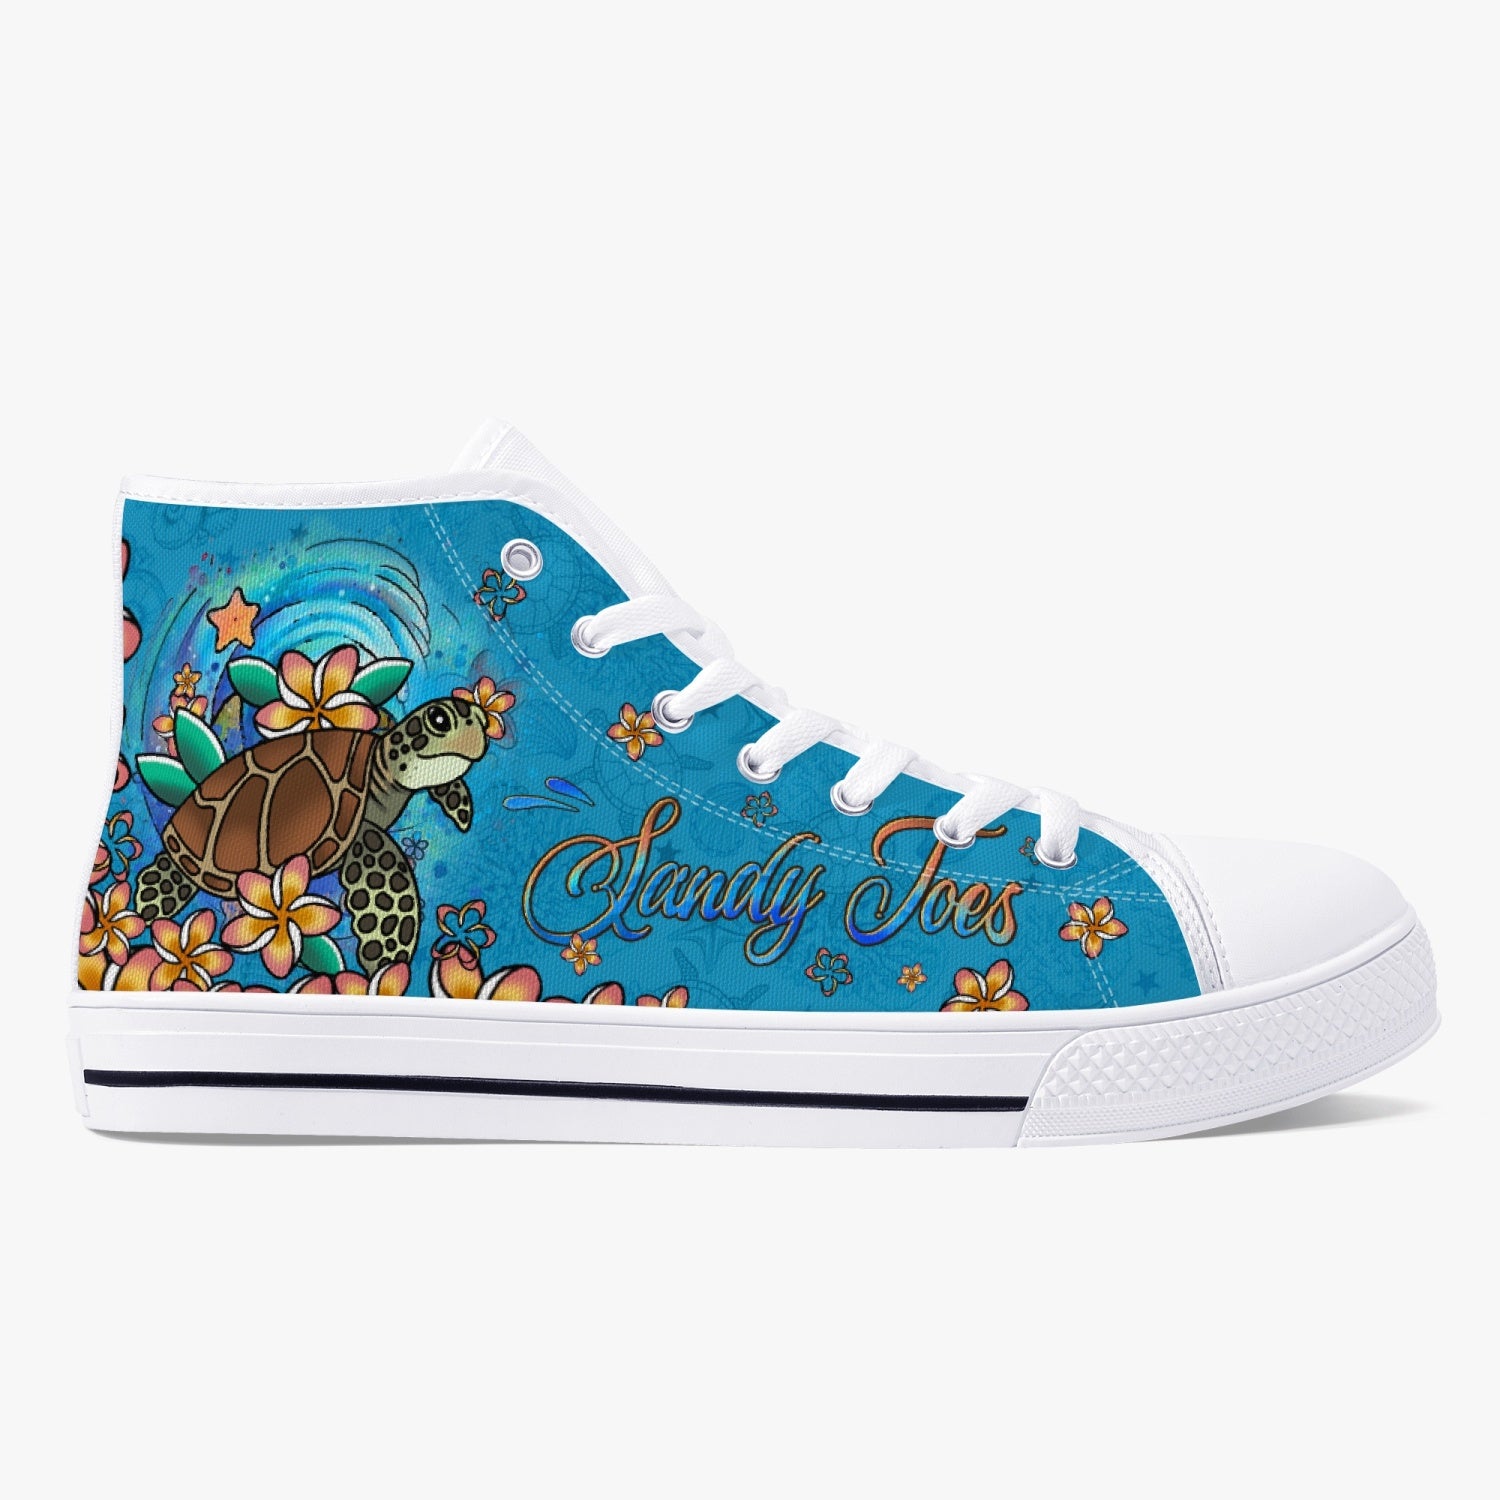 SANDY TOES SUNKISSED NOSE HIGH TOP CANVAS SHOES - YHDU1007234